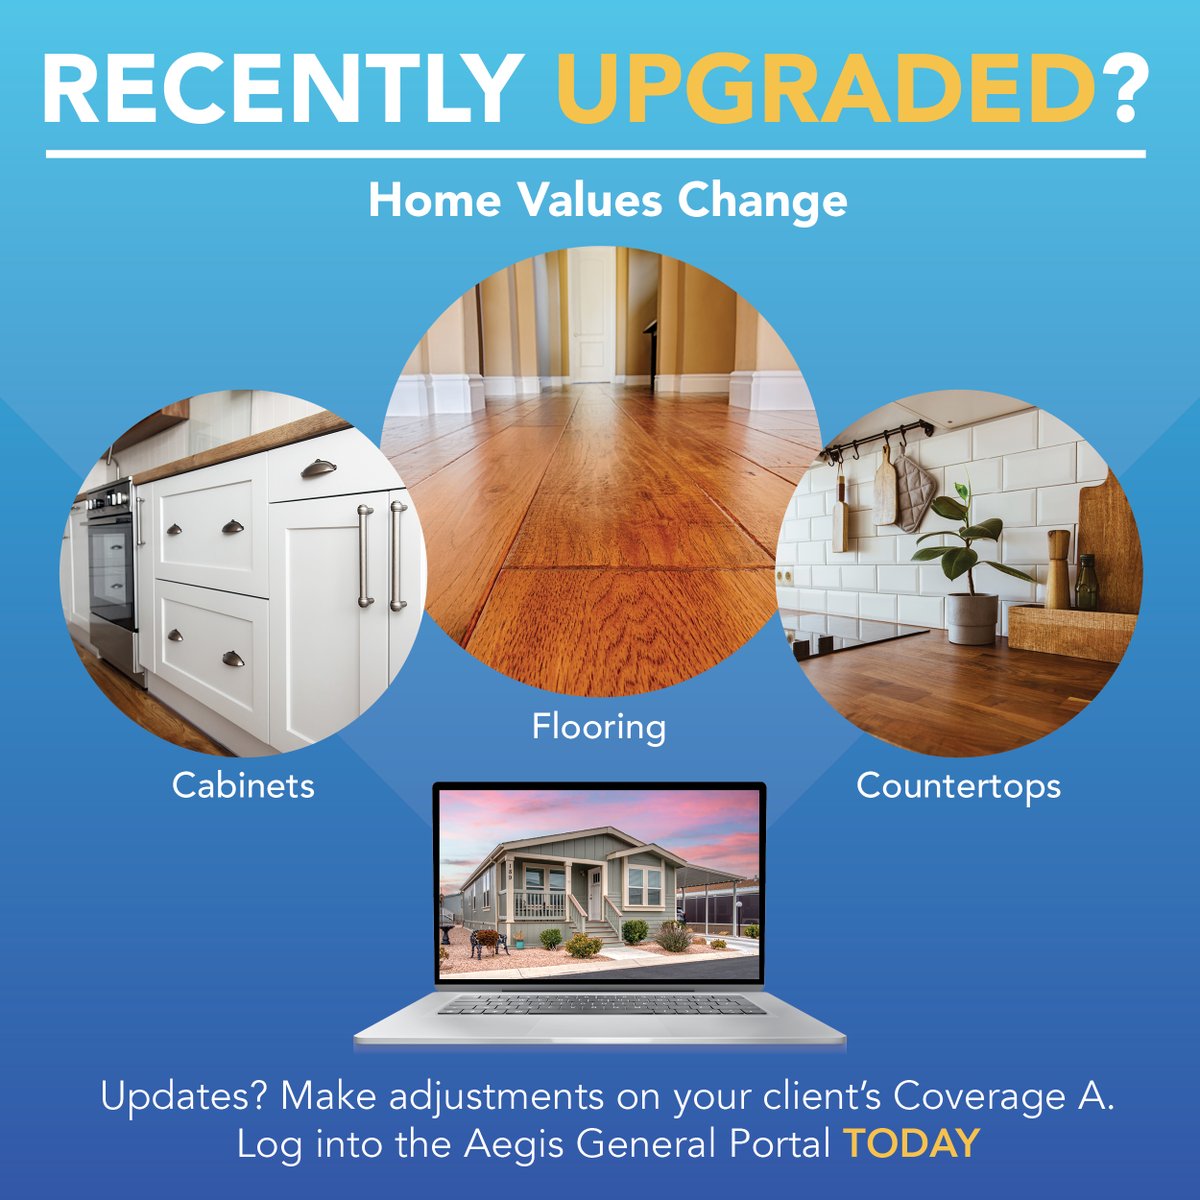 Things change. That is why Aegis General allows you to reflect and change an insured's home quality grade when placing a risk with us. Be sure to check out this helpful feature the next time you are in the Aegis General portal! #AegisNation #HomeQualityUpgrades